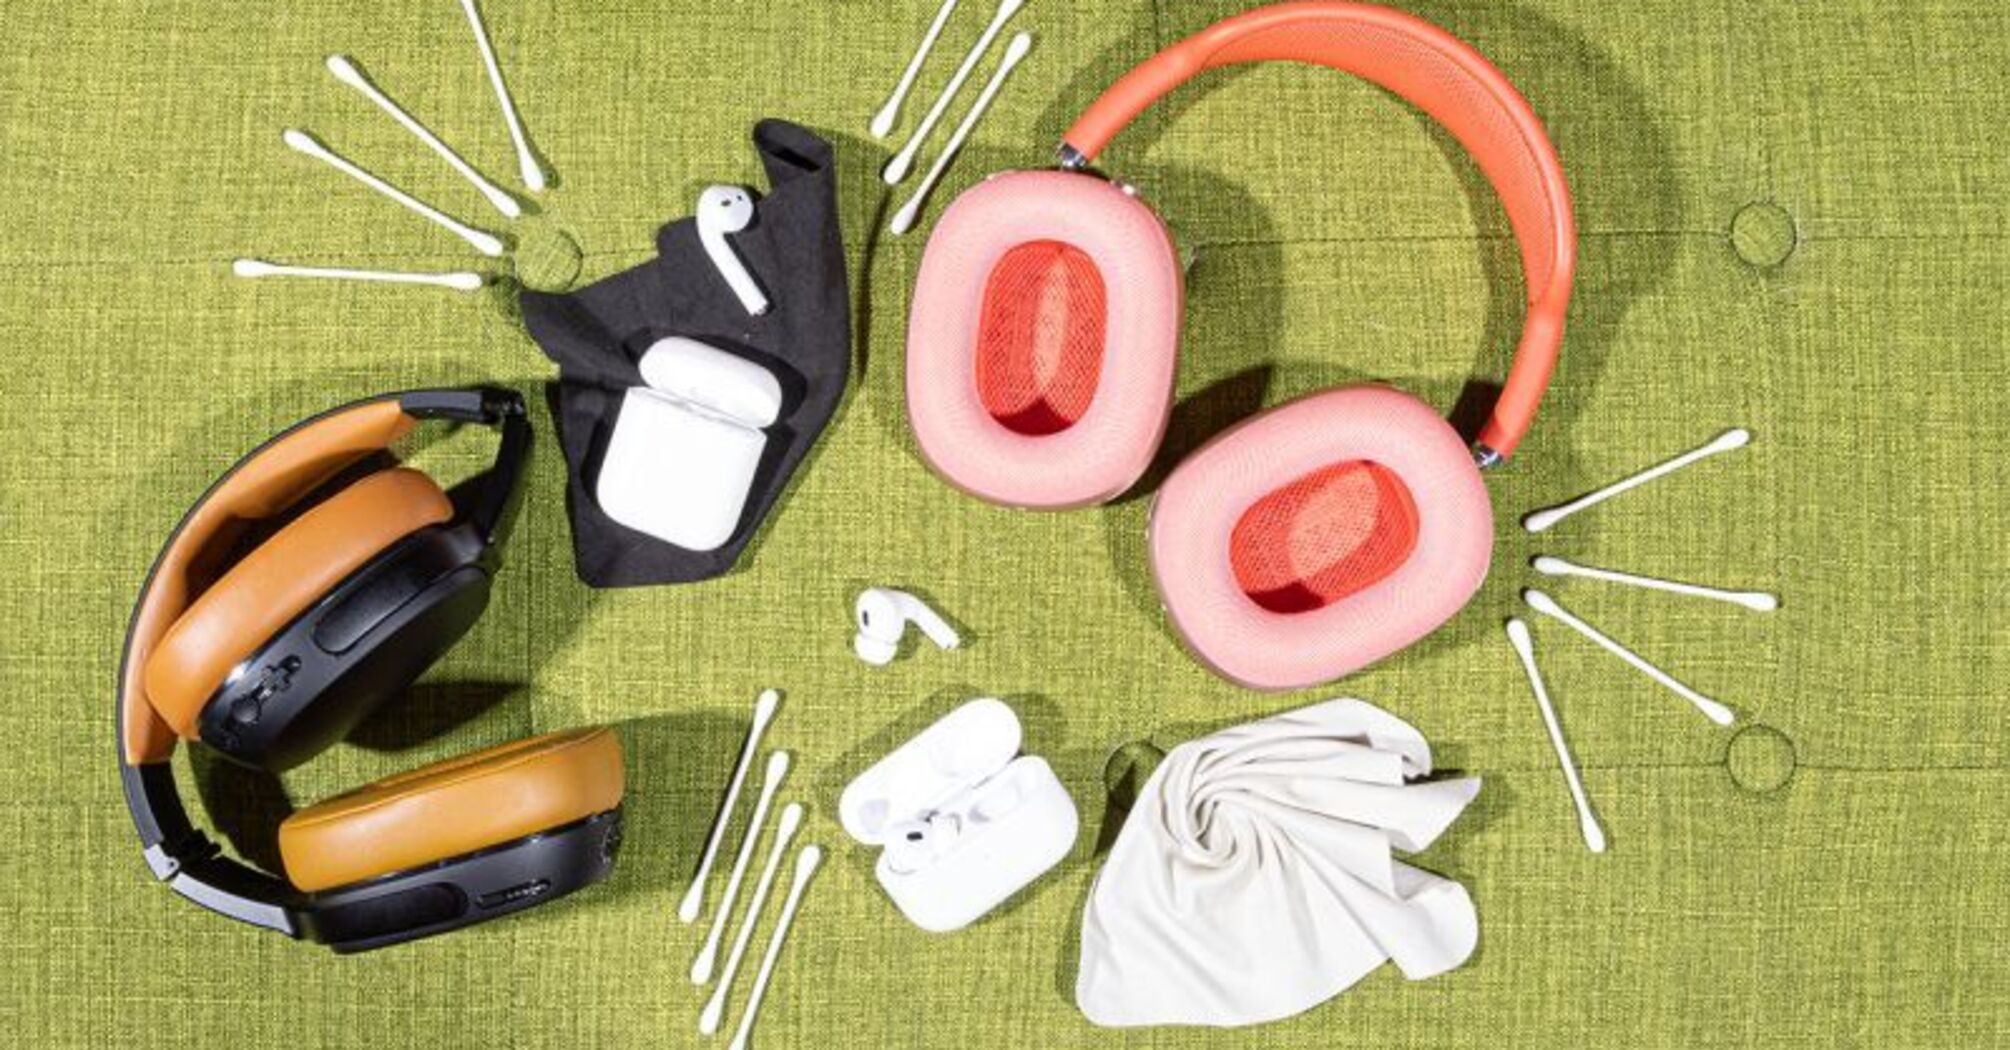 How to clean headphones and get rid of sulfur